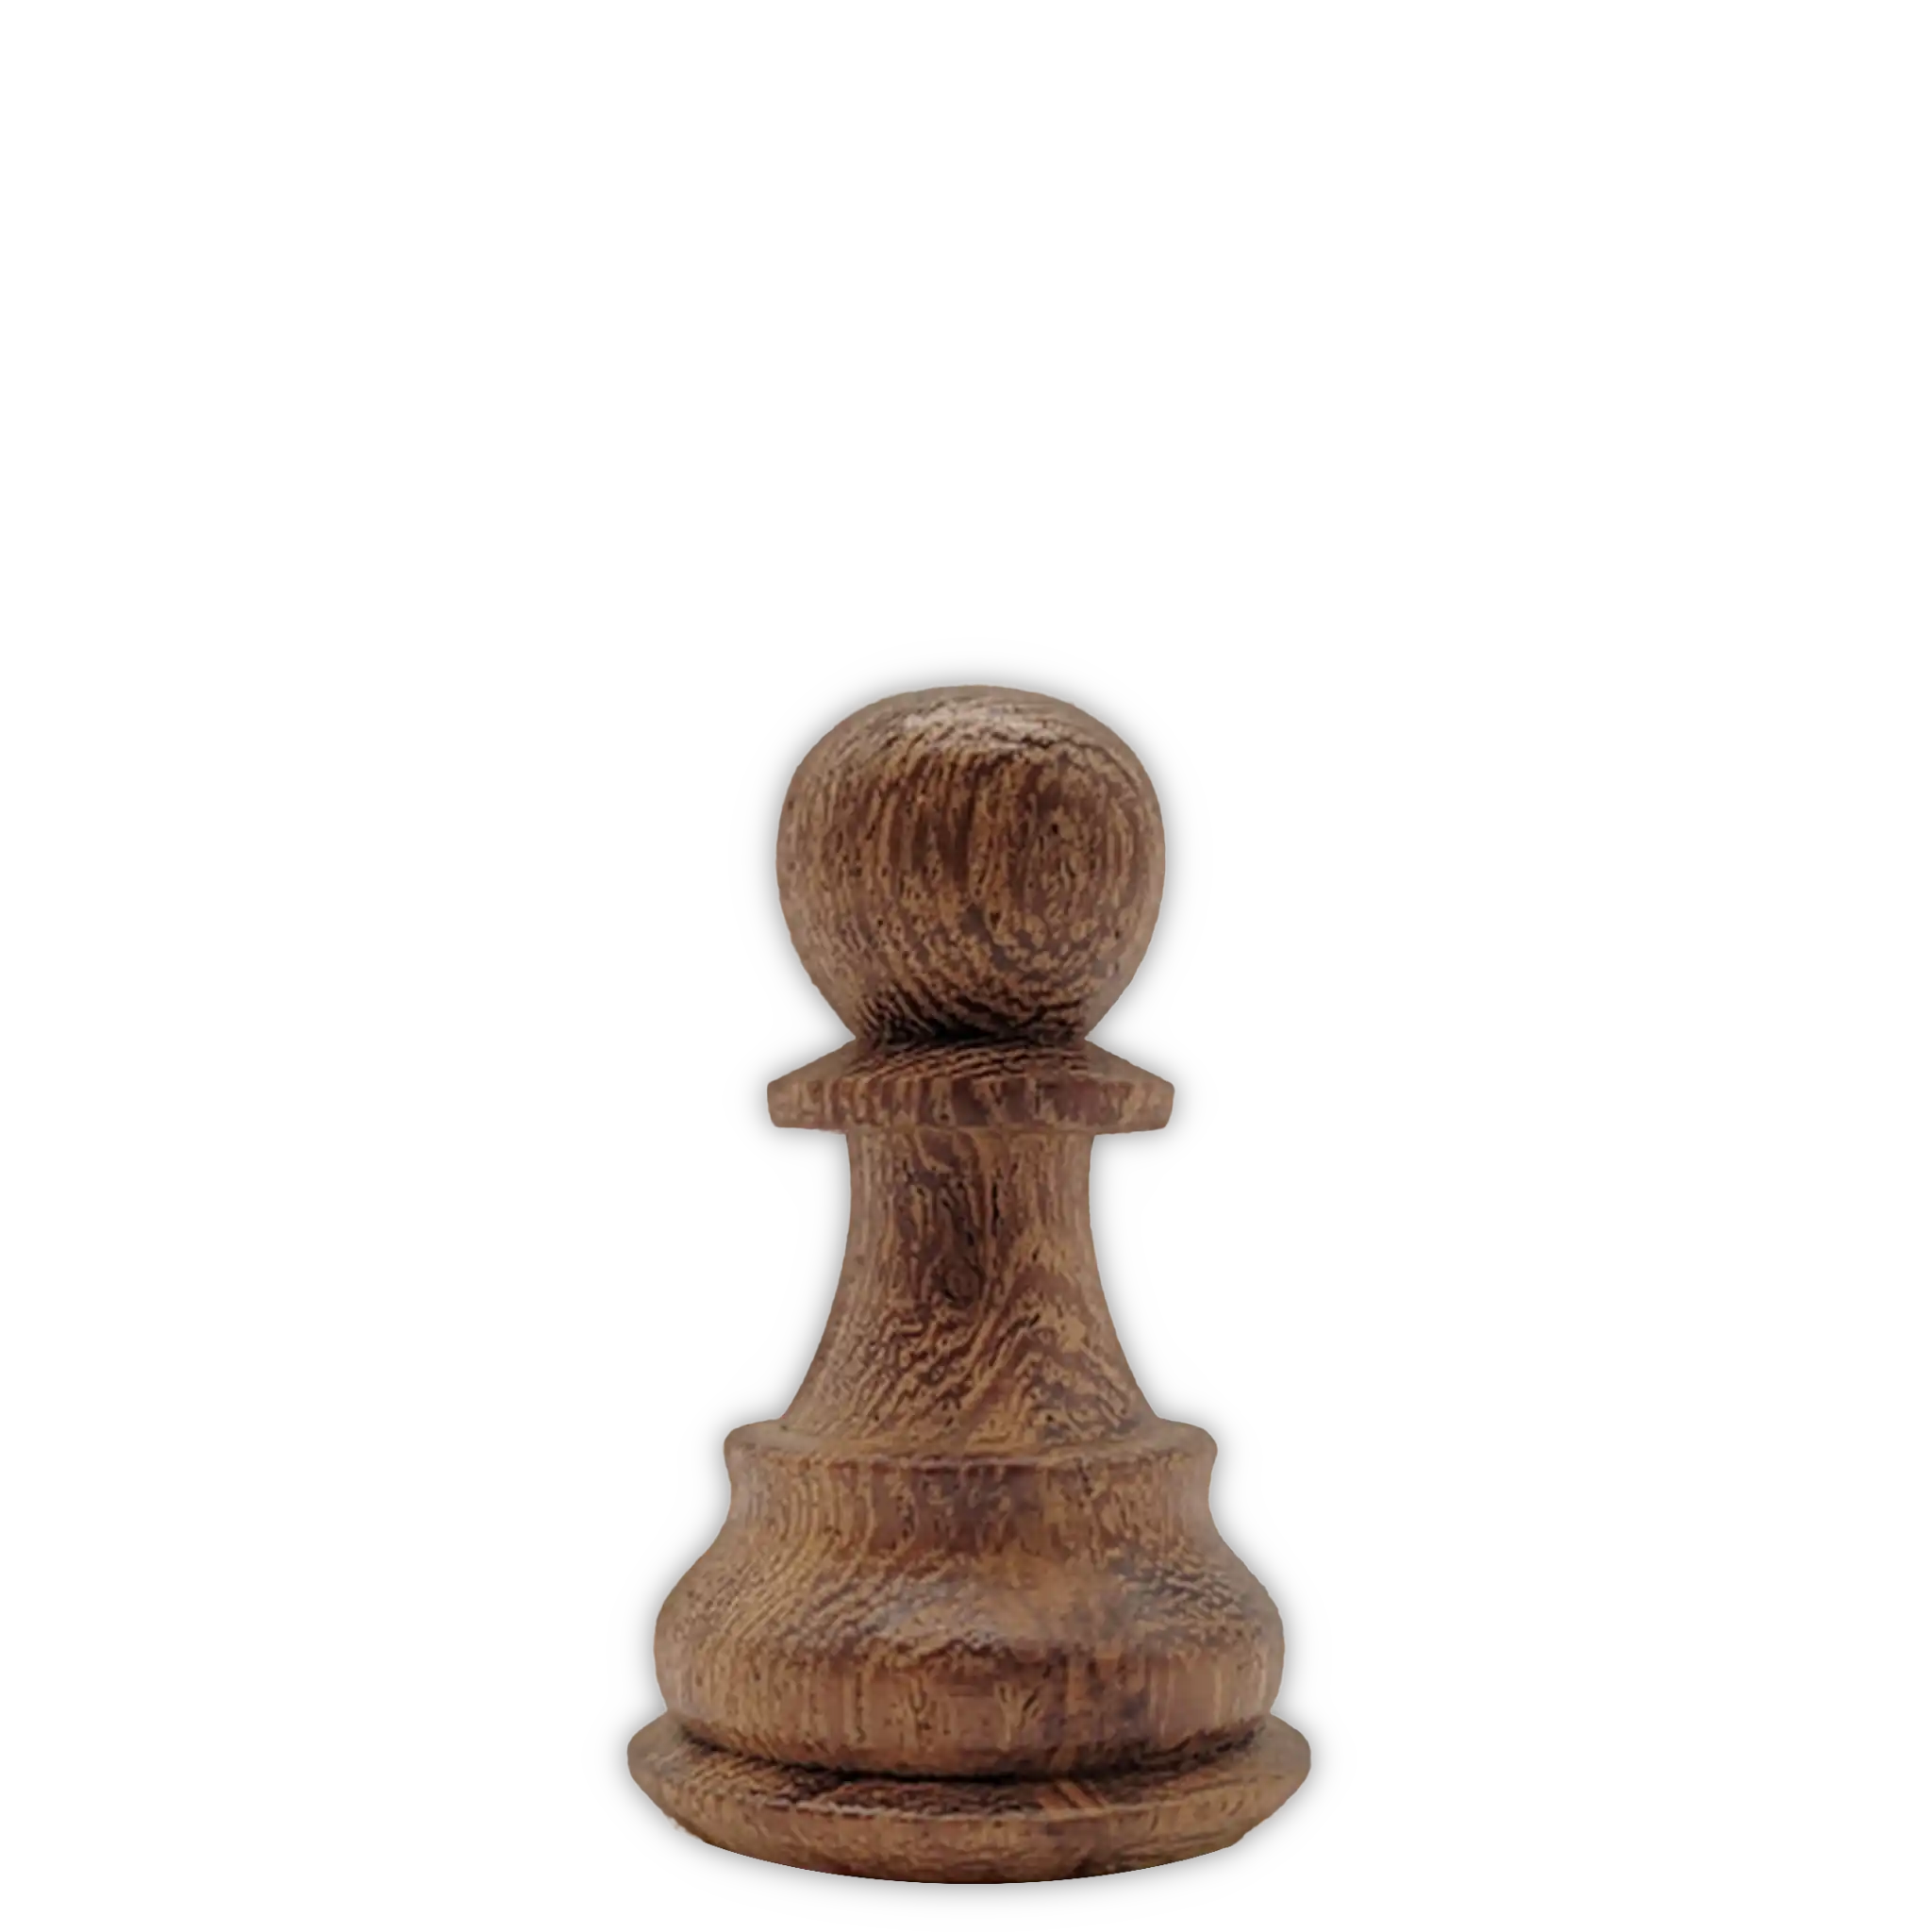 A pawn from a chess game